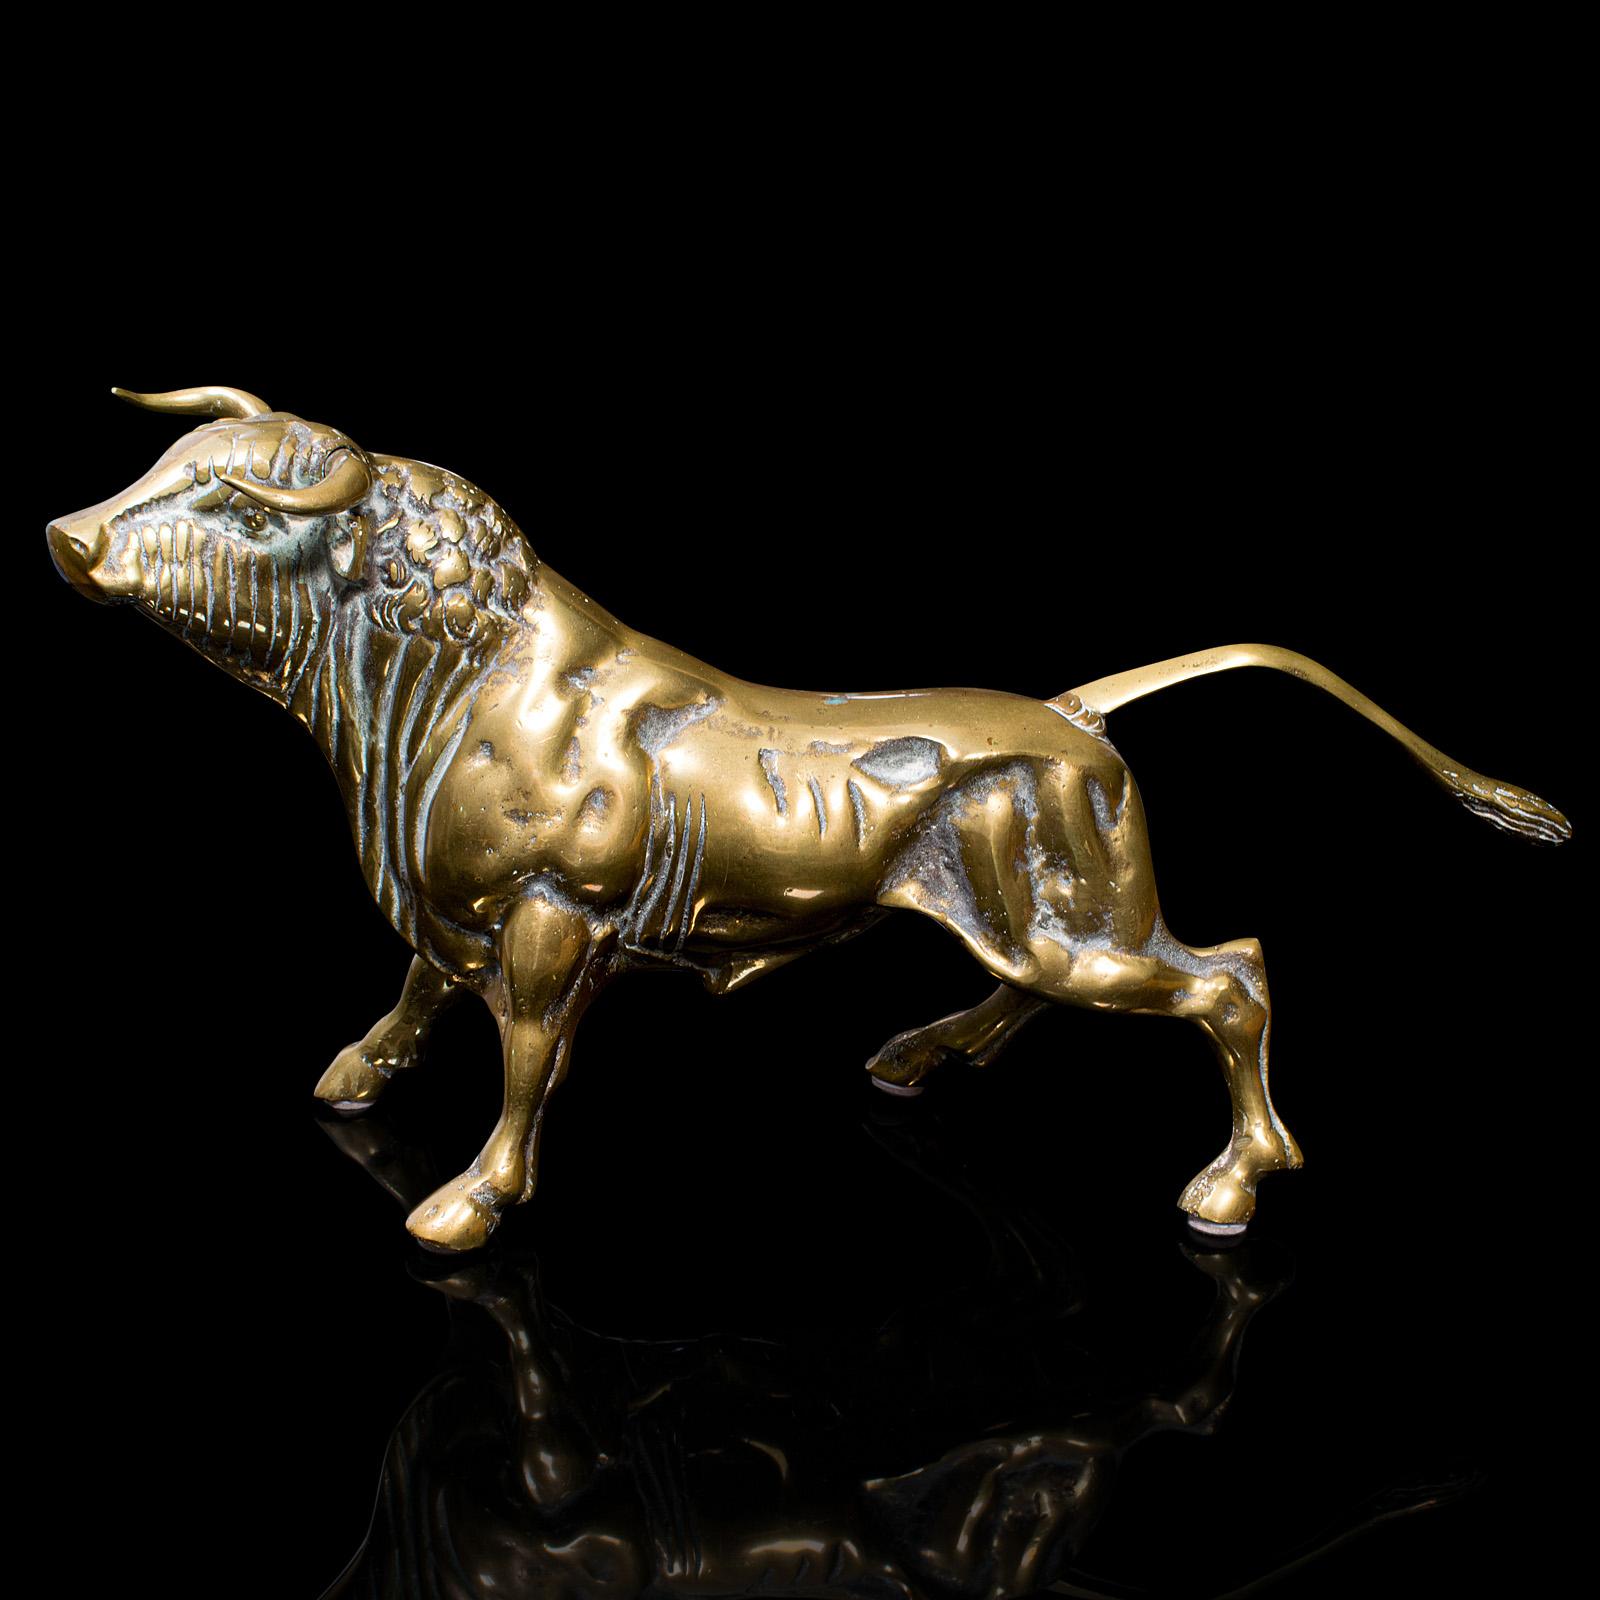 This is an antique fighting bull figure. An Italian, heavy brass ornamental statue, dating to the late Victorian period, circa 1900.

Superb weight with a powerful, muscular stance
Displays a desirable aged patina throughout
Polished brass